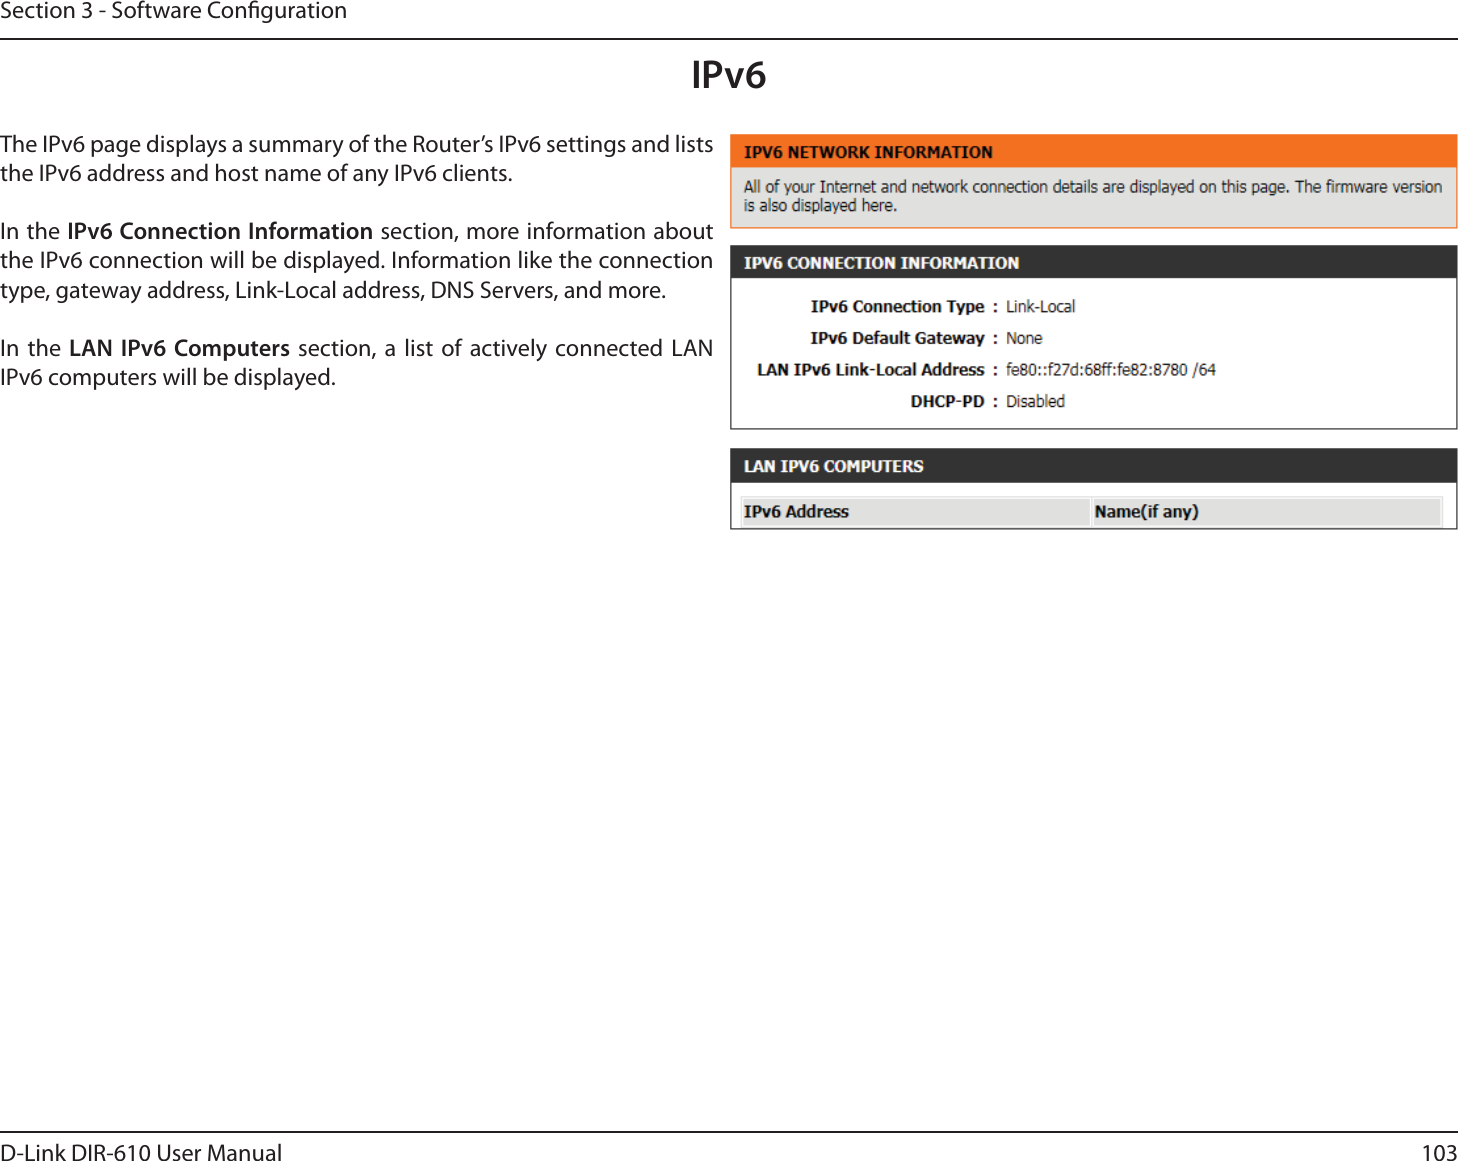 103D-Link DIR-610 User ManualSection 3 - Software CongurationIPv6The IPv6 page displays a summary of the Router’s IPv6 settings and lists the IPv6 address and host name of any IPv6 clients.In the IPv6 Connection Information section, more information about the IPv6 connection will be displayed. Information like the connection type, gateway address, Link-Local address, DNS Servers, and more.In the LAN IPv6 Computers section, a list of actively connected LAN IPv6 computers will be displayed.